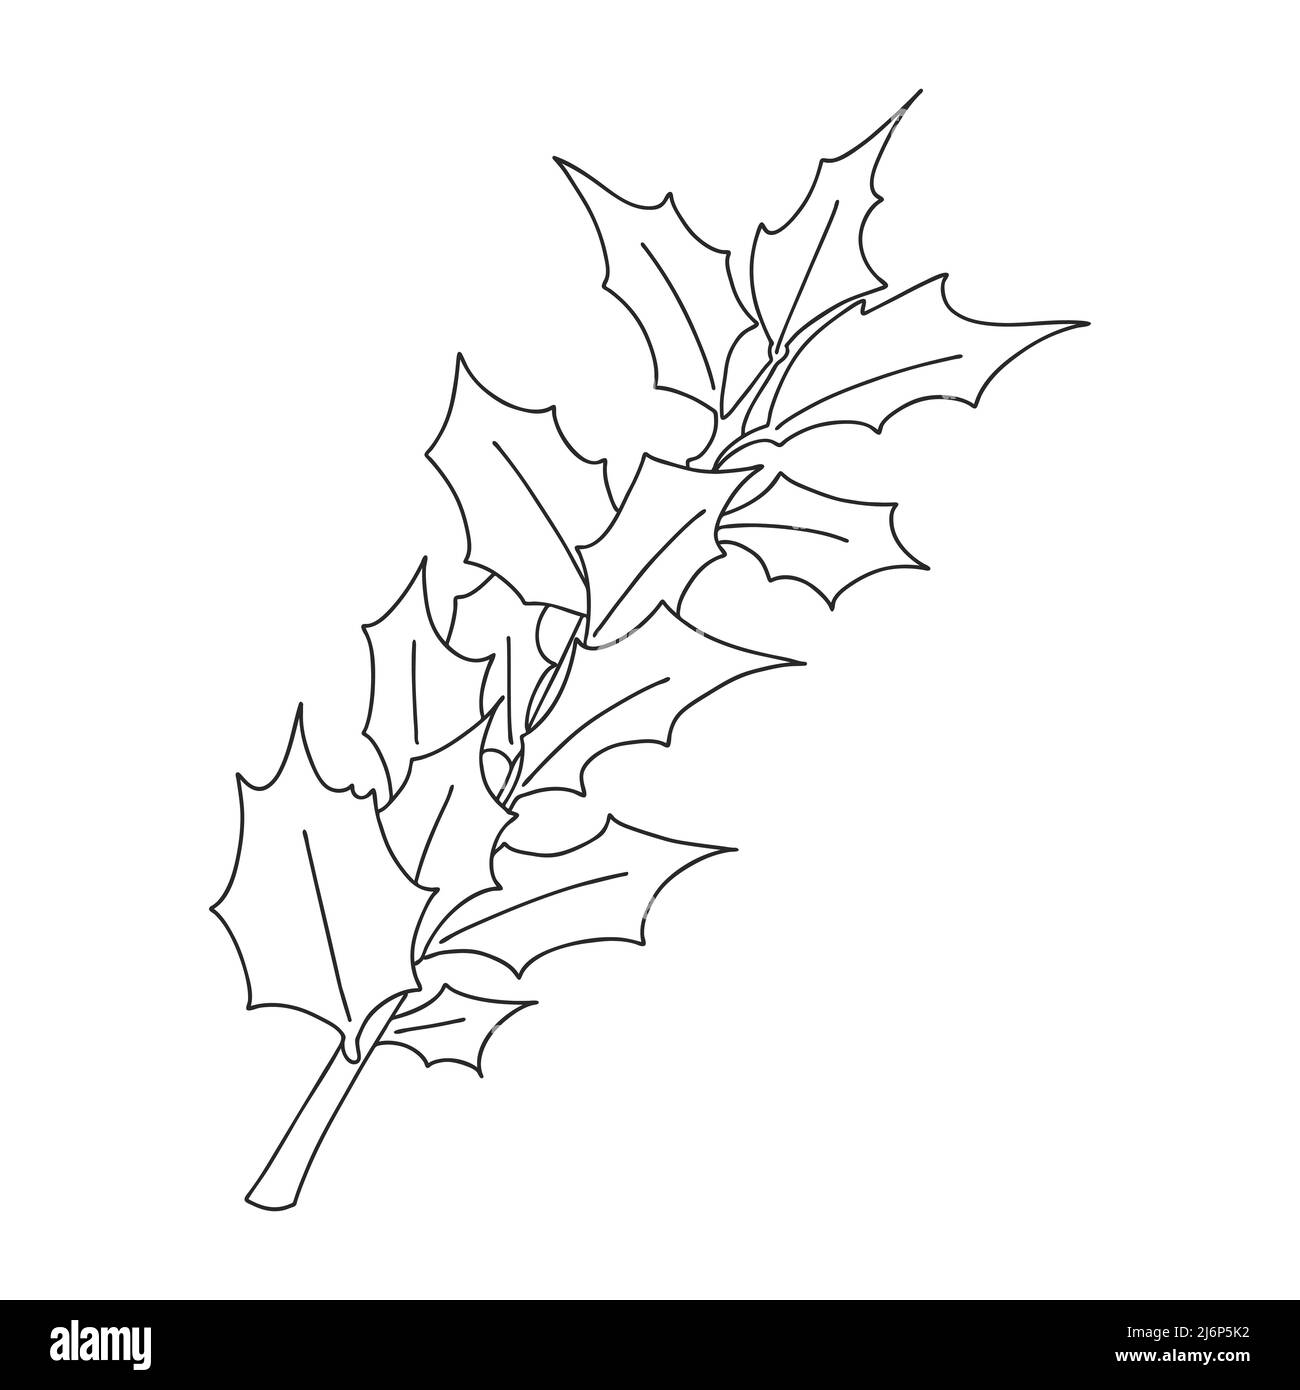 Holly branch with leaves. Botanical design element for magazines, articles and brochures, menus and recipes. Simple black and white vector illustratio Stock Vector